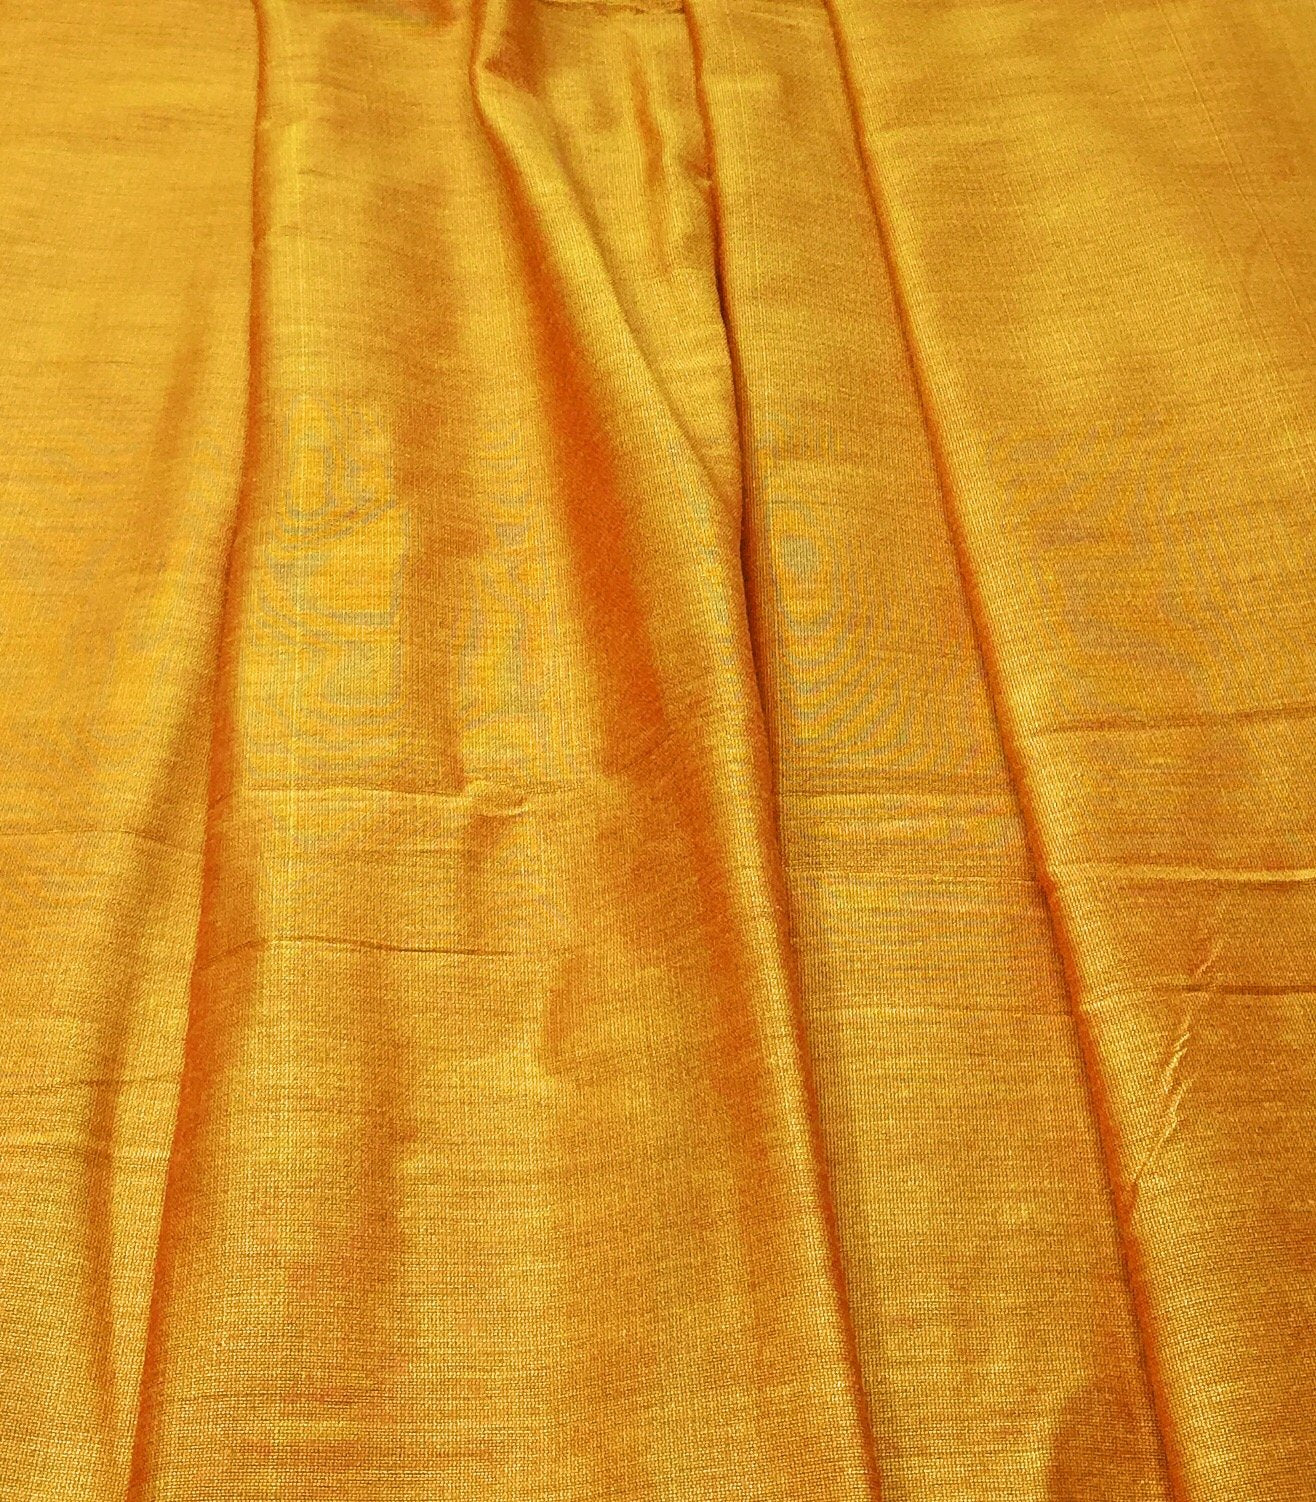 Cotton Silk Yellow Solids  Fabric Material - By the yard